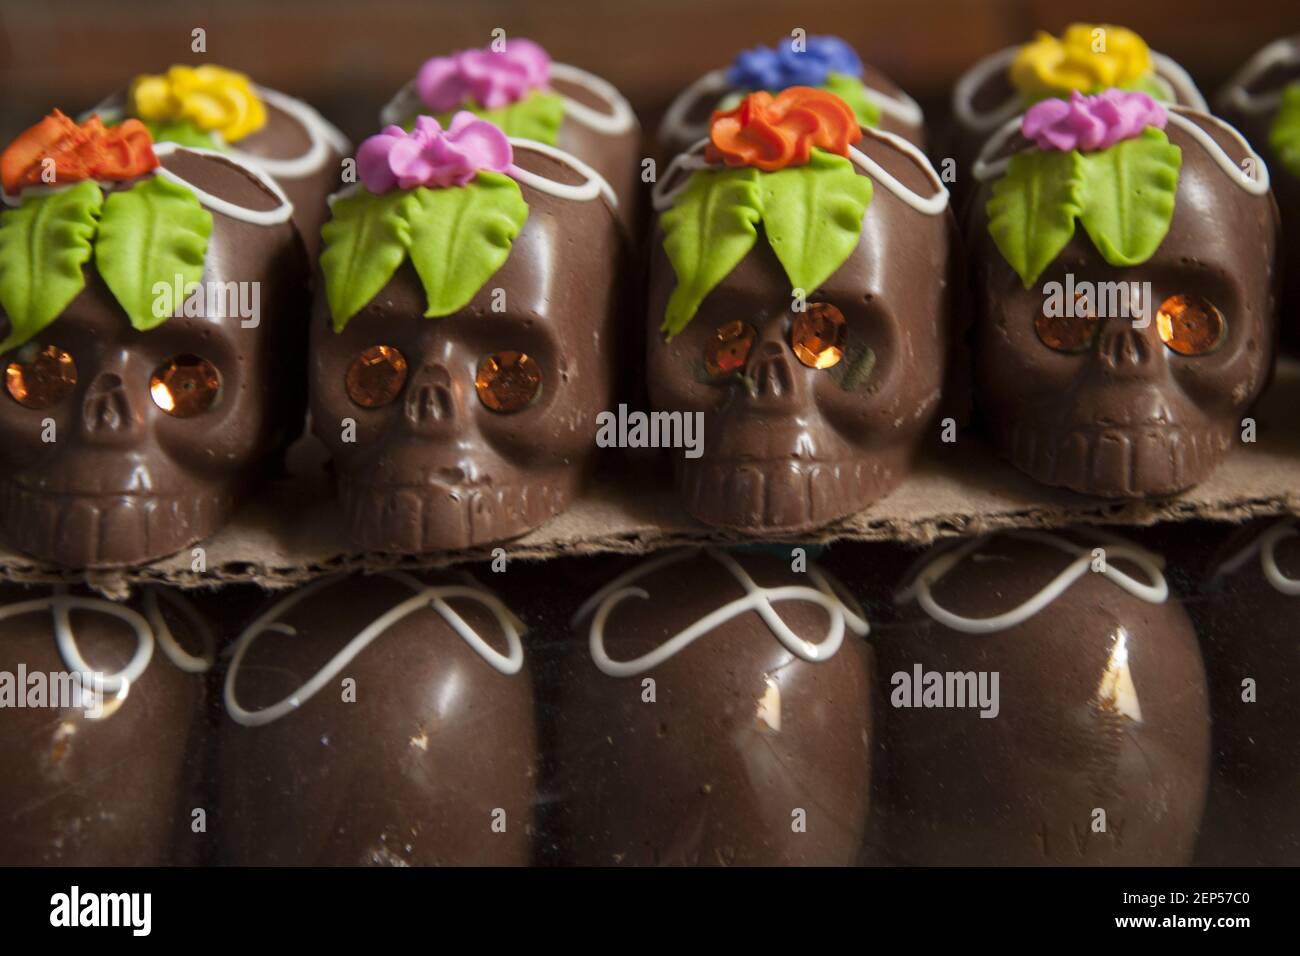 TLAXCALA, MEXICO - OCTOBER 29: people sell sugar skulls, chocolate skulls, alfe–ique figures in the city markets to celebrate the day of the dead adorning the altars and graves of loved ones. on October 29, 2019 in Tlaxcala, Mexico (Photo by Eyepix/Sipa USA) Stock Photo